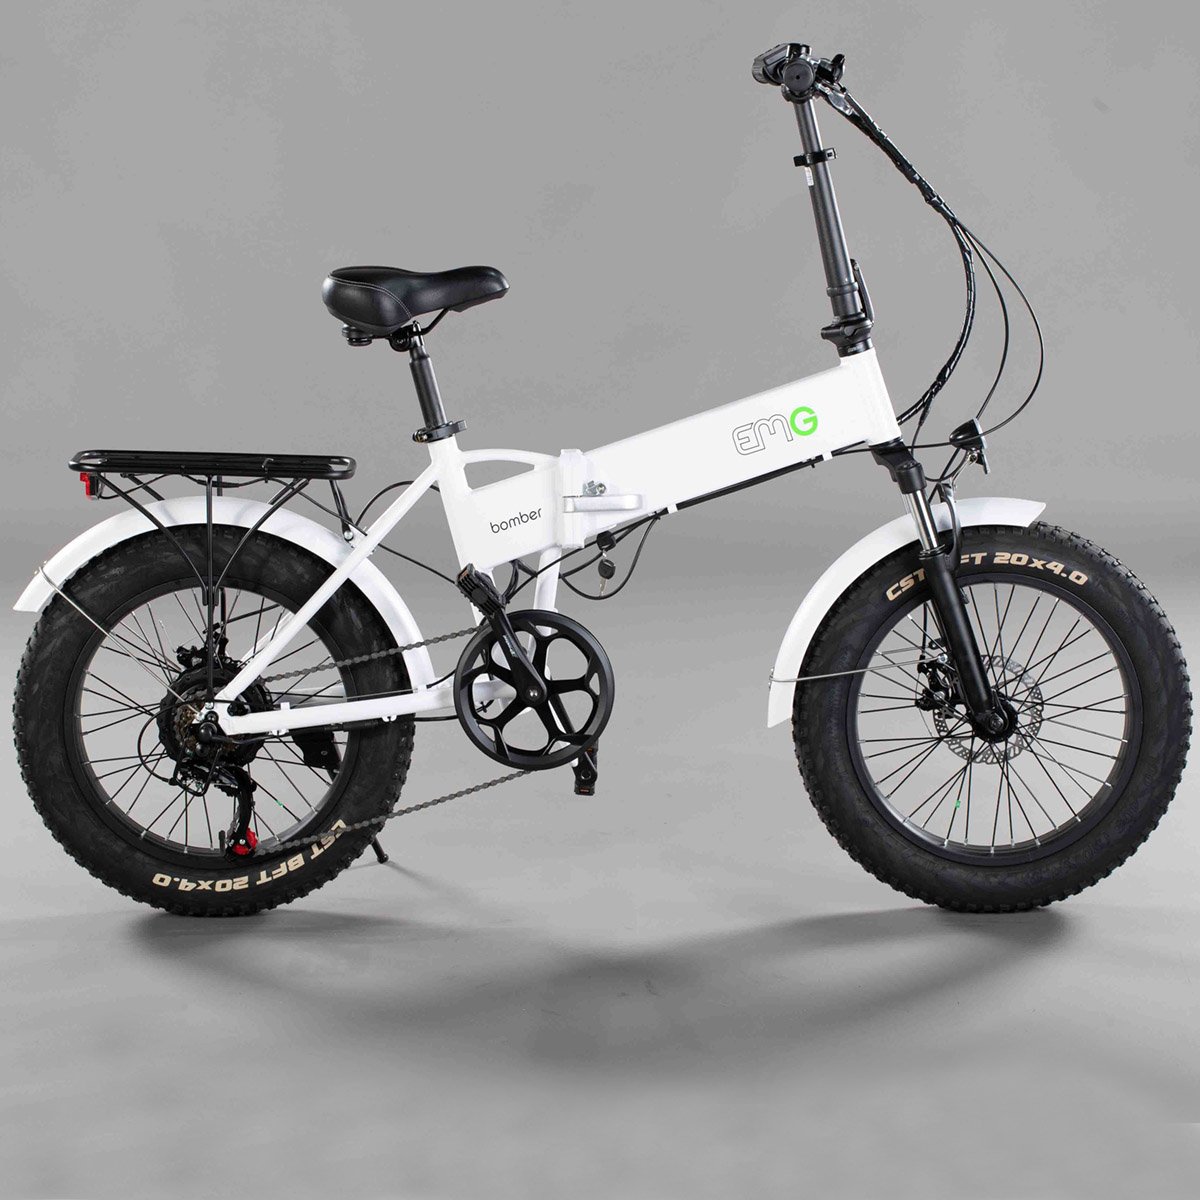 Bomber, electrical bike, foldable, 20" fat tires, white